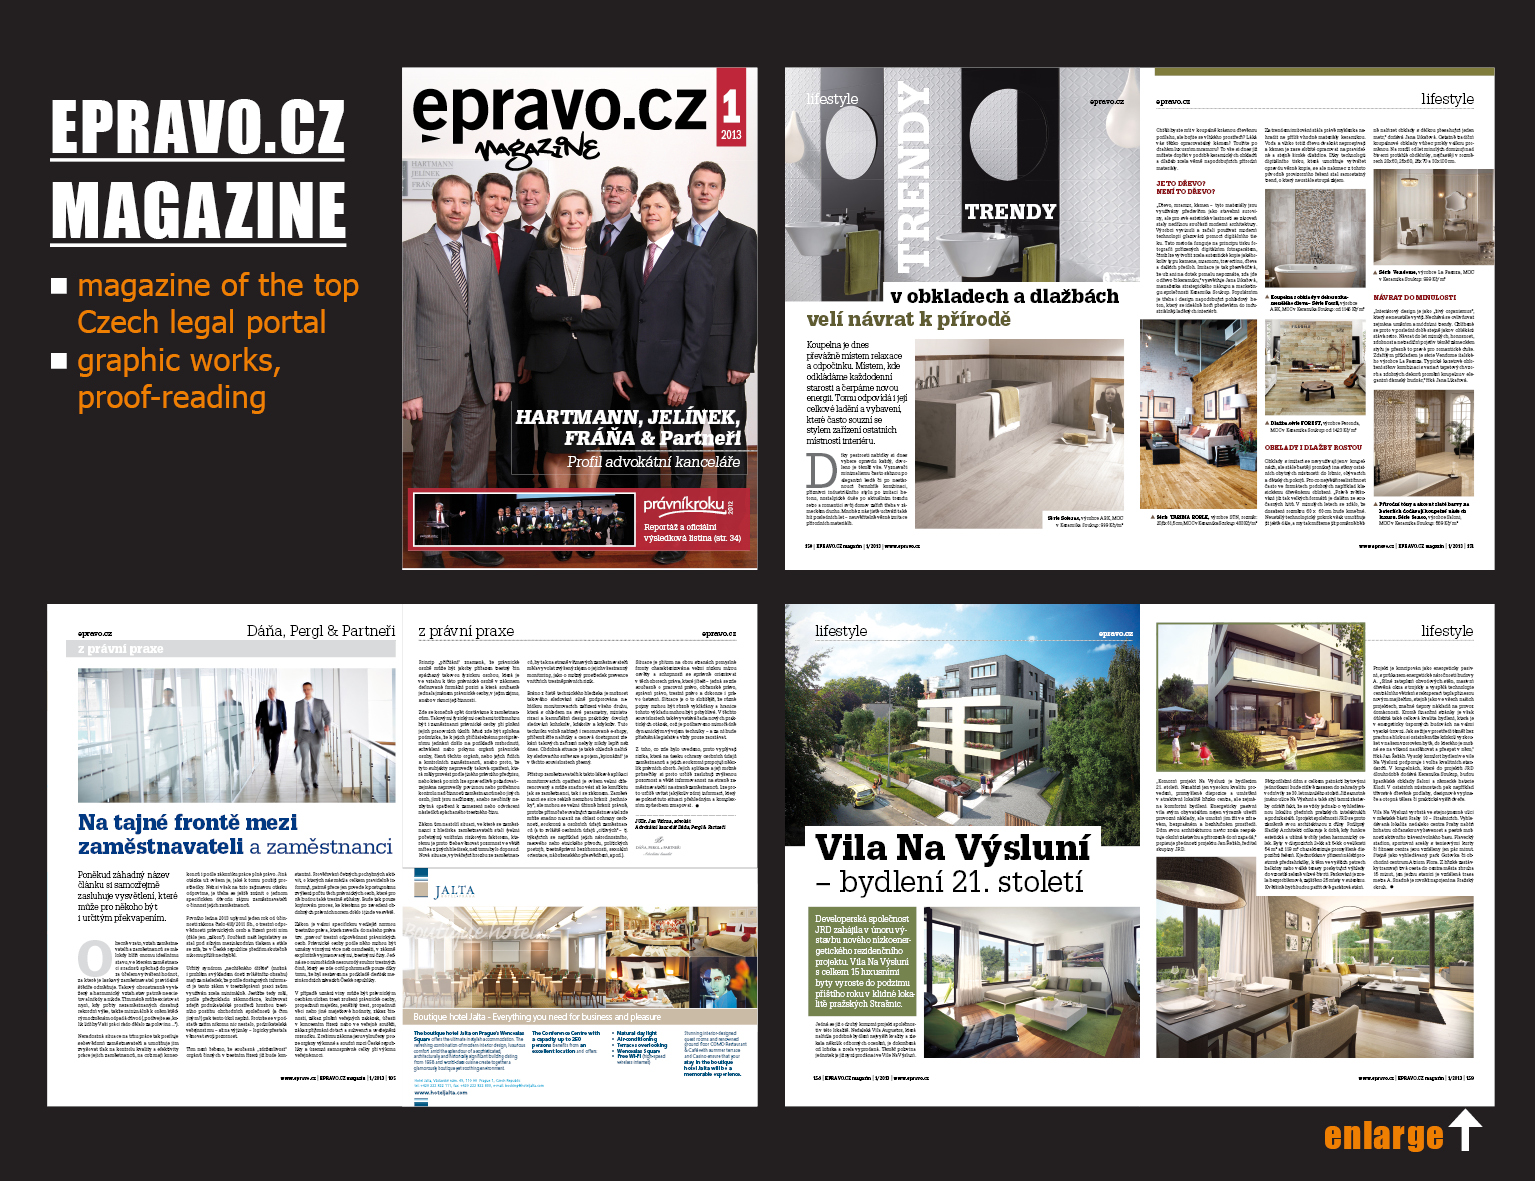 Magazine of the largest and leading Czech legal portal EPRAVO.CZ